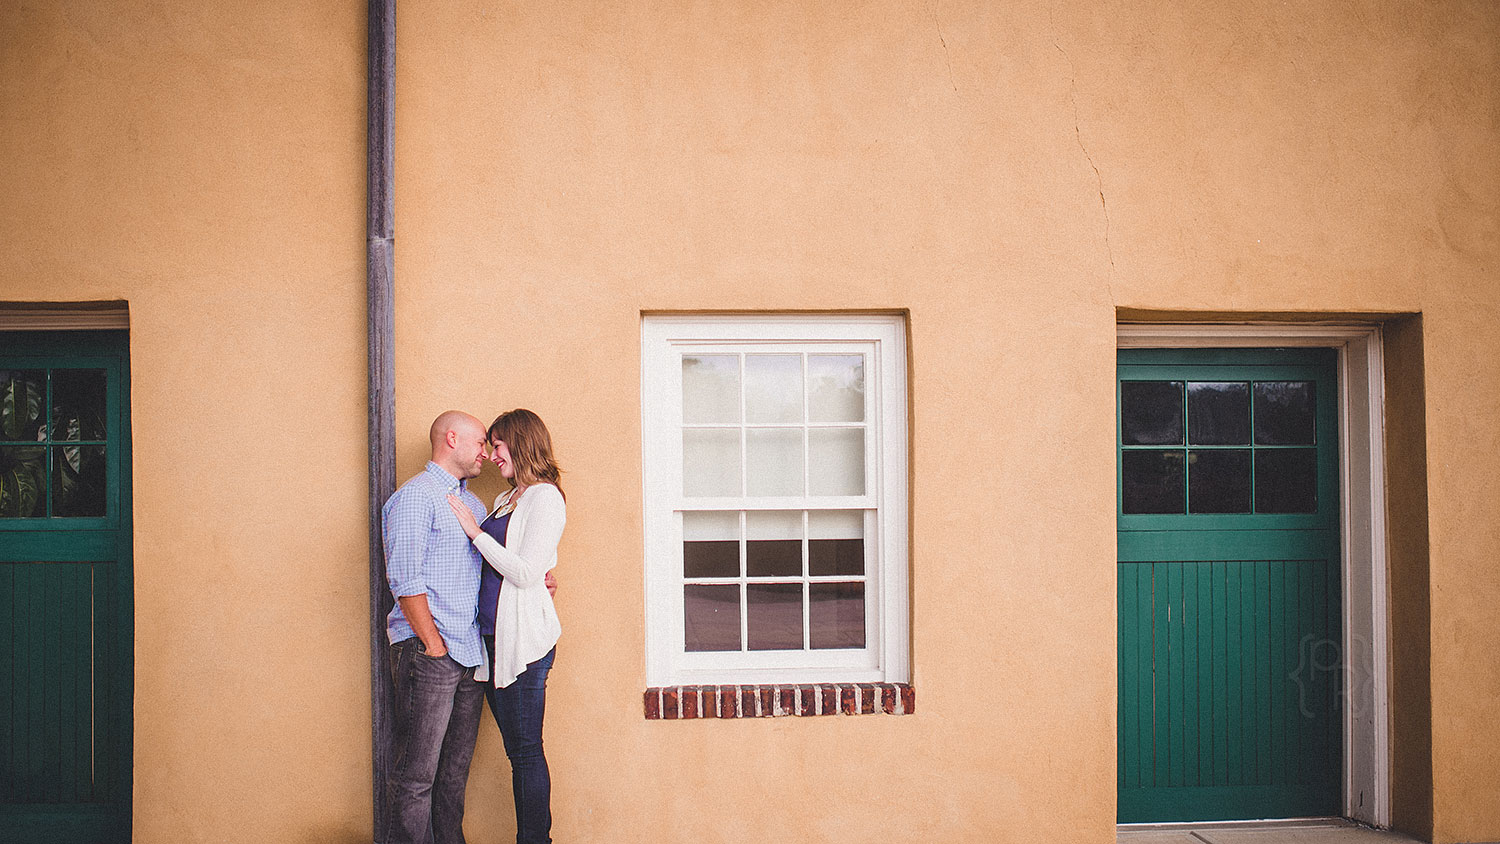 pat-robinson-photography-wilmington-engagement-session-1-2.jpg